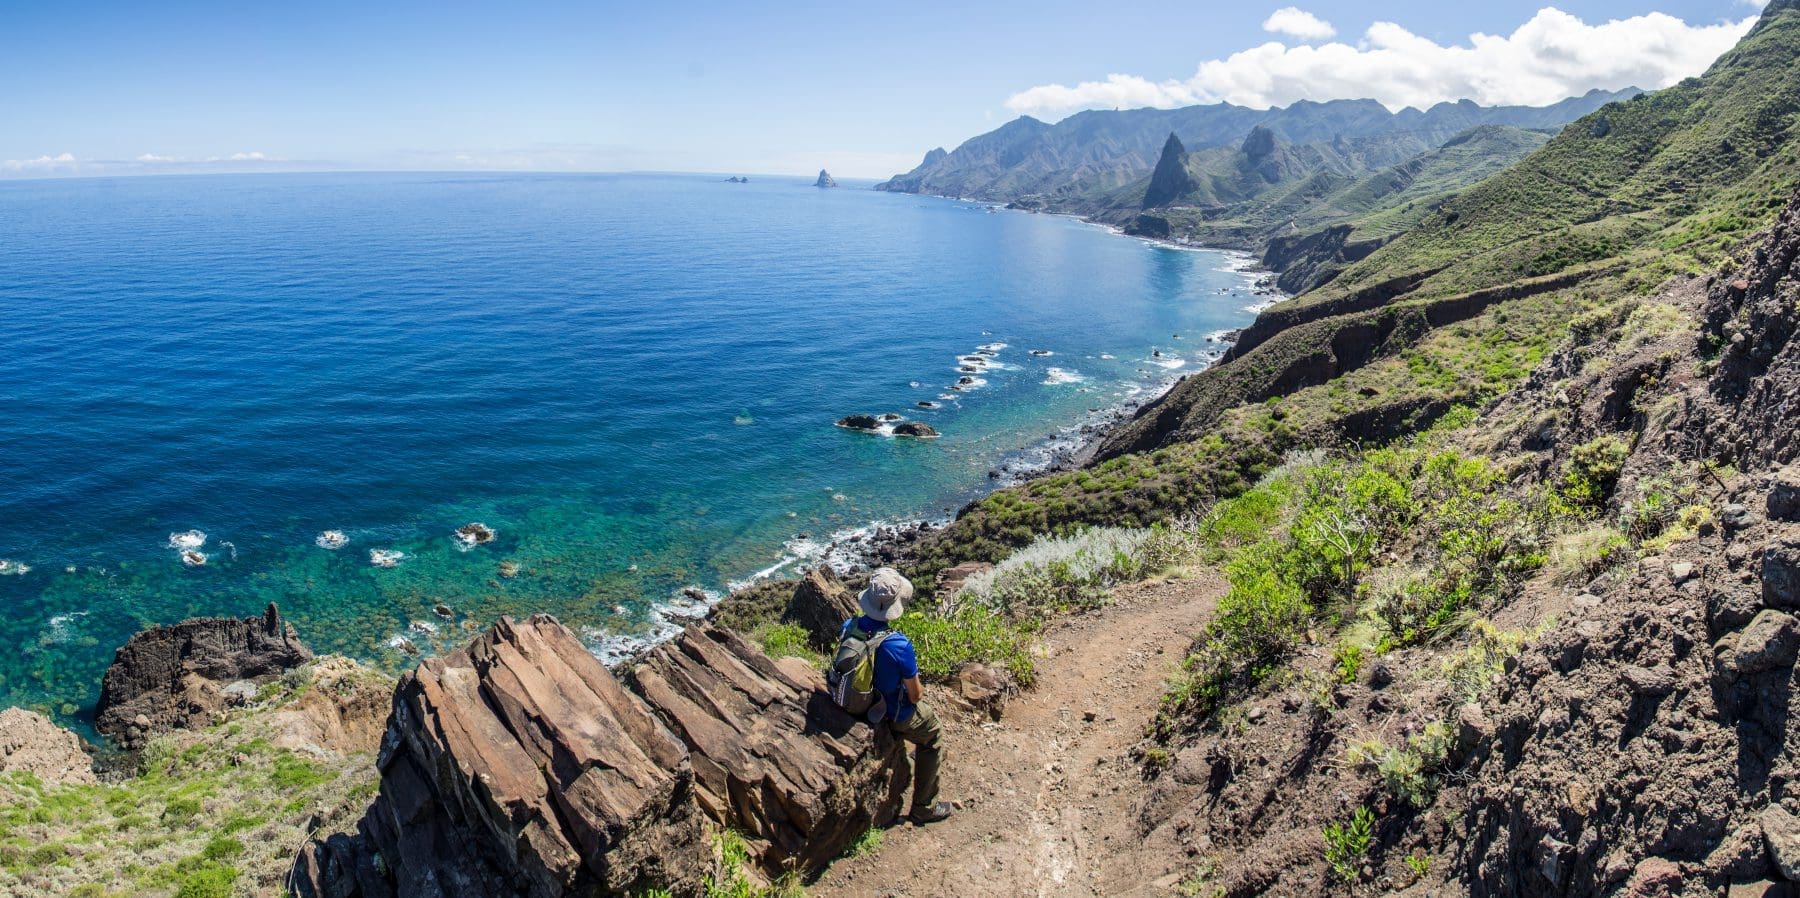 4 Eco Things to Do in Tenerife